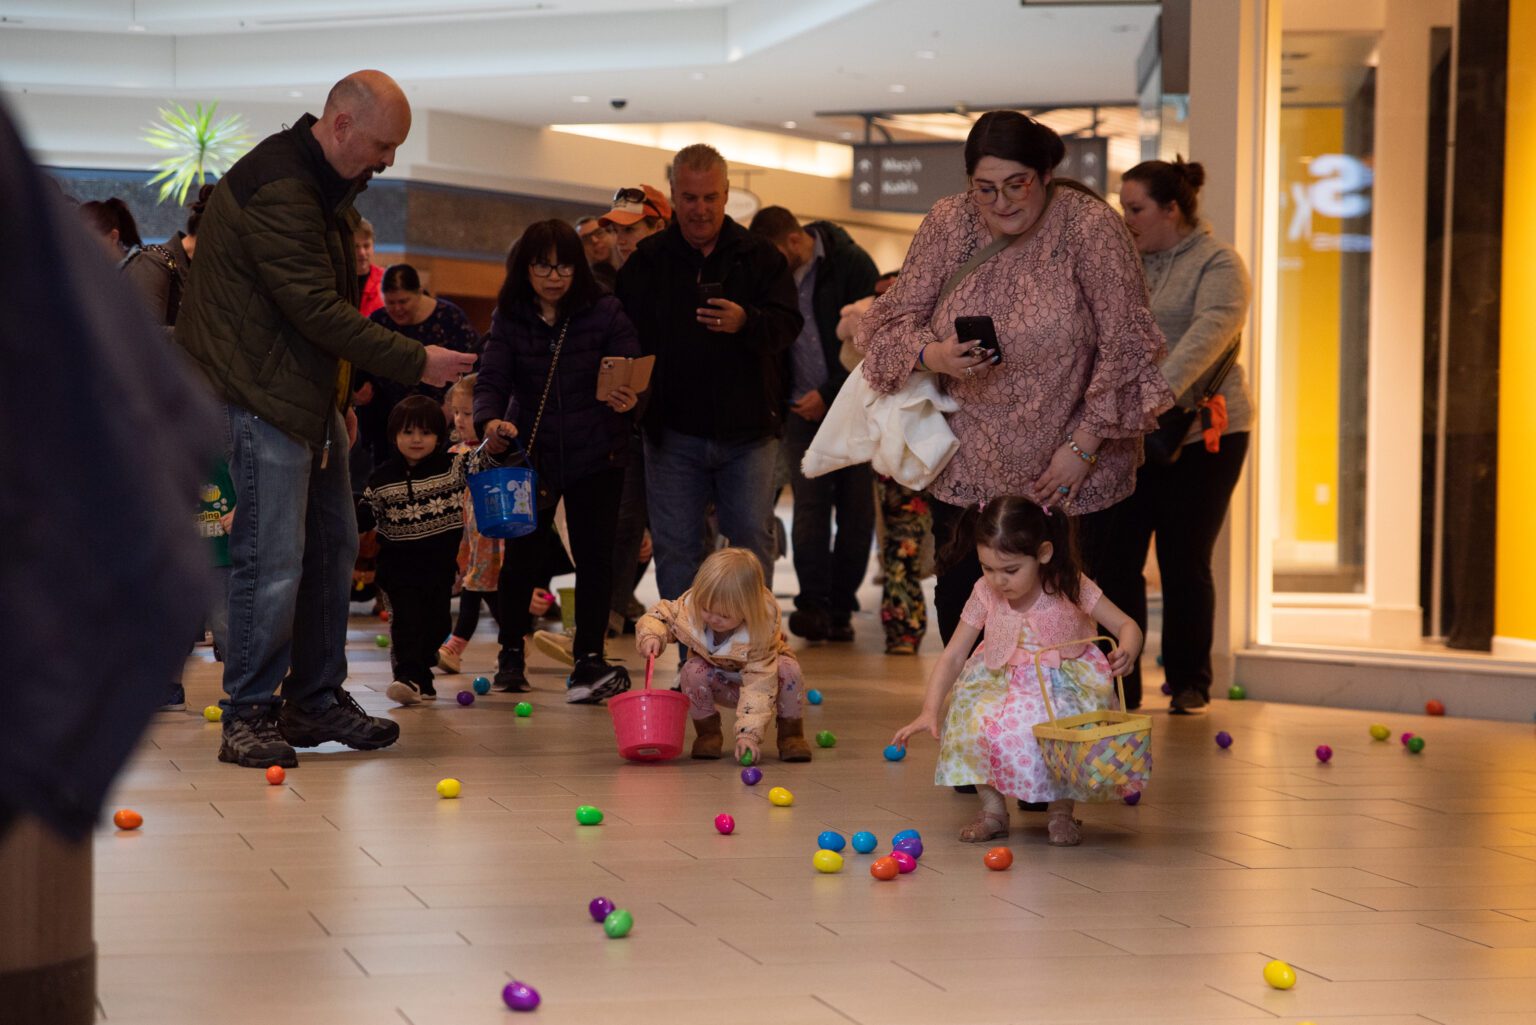 Children pick up Easter eggs at Bellis Fair April 8 during the mall's Easter egg hunt. Hundreds of kids showed up to search for 5